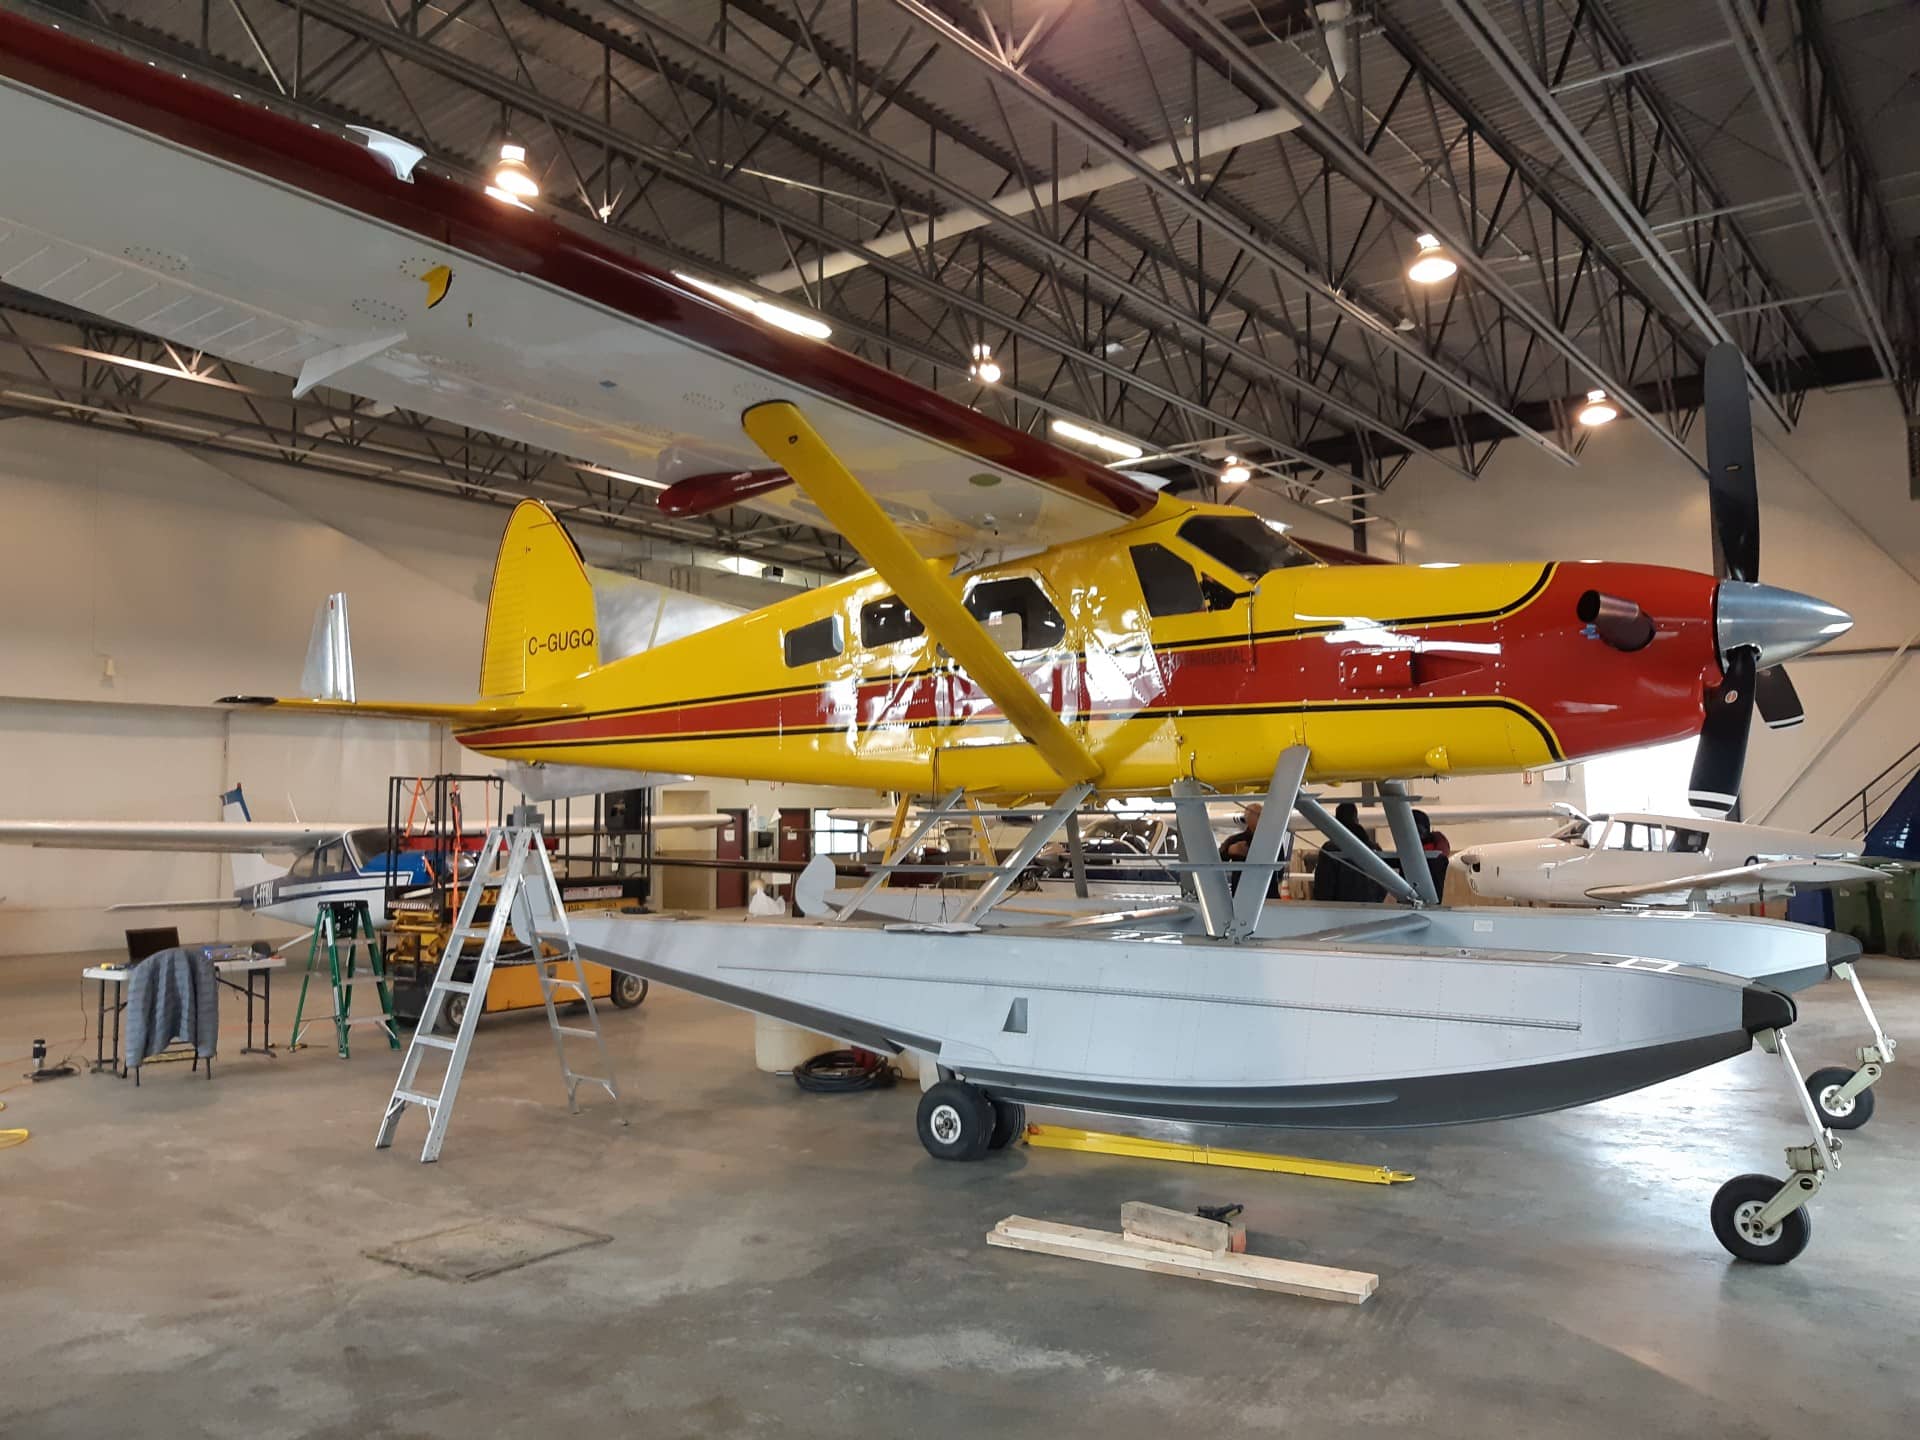 A yellow and red plane inside a garage